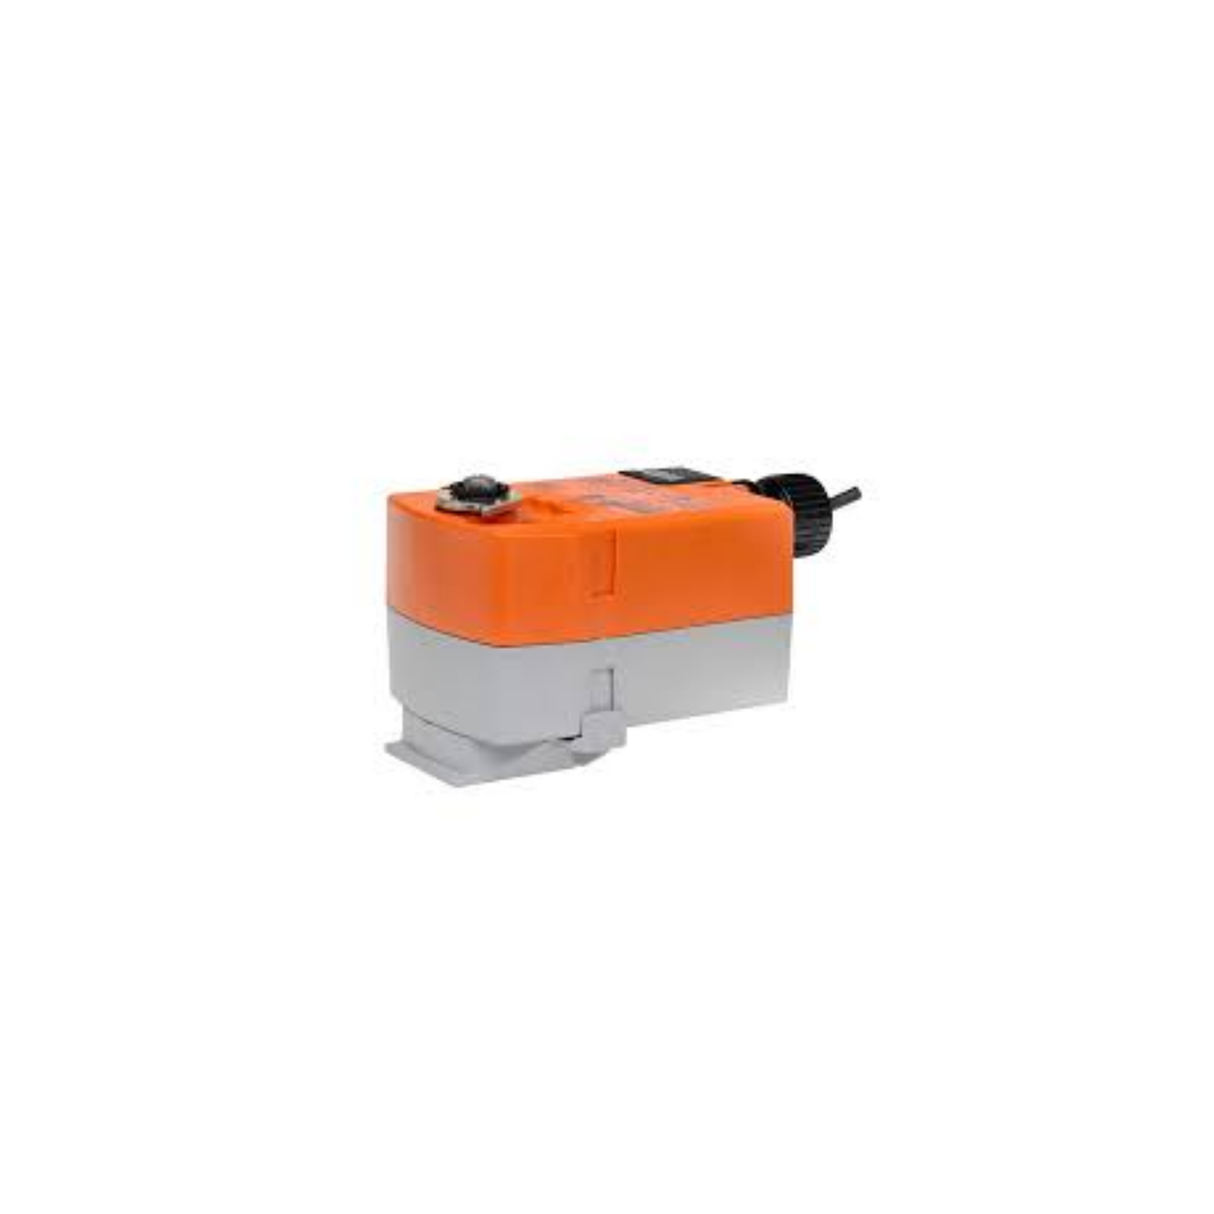 Belimo TFRB24 Motor Actuator